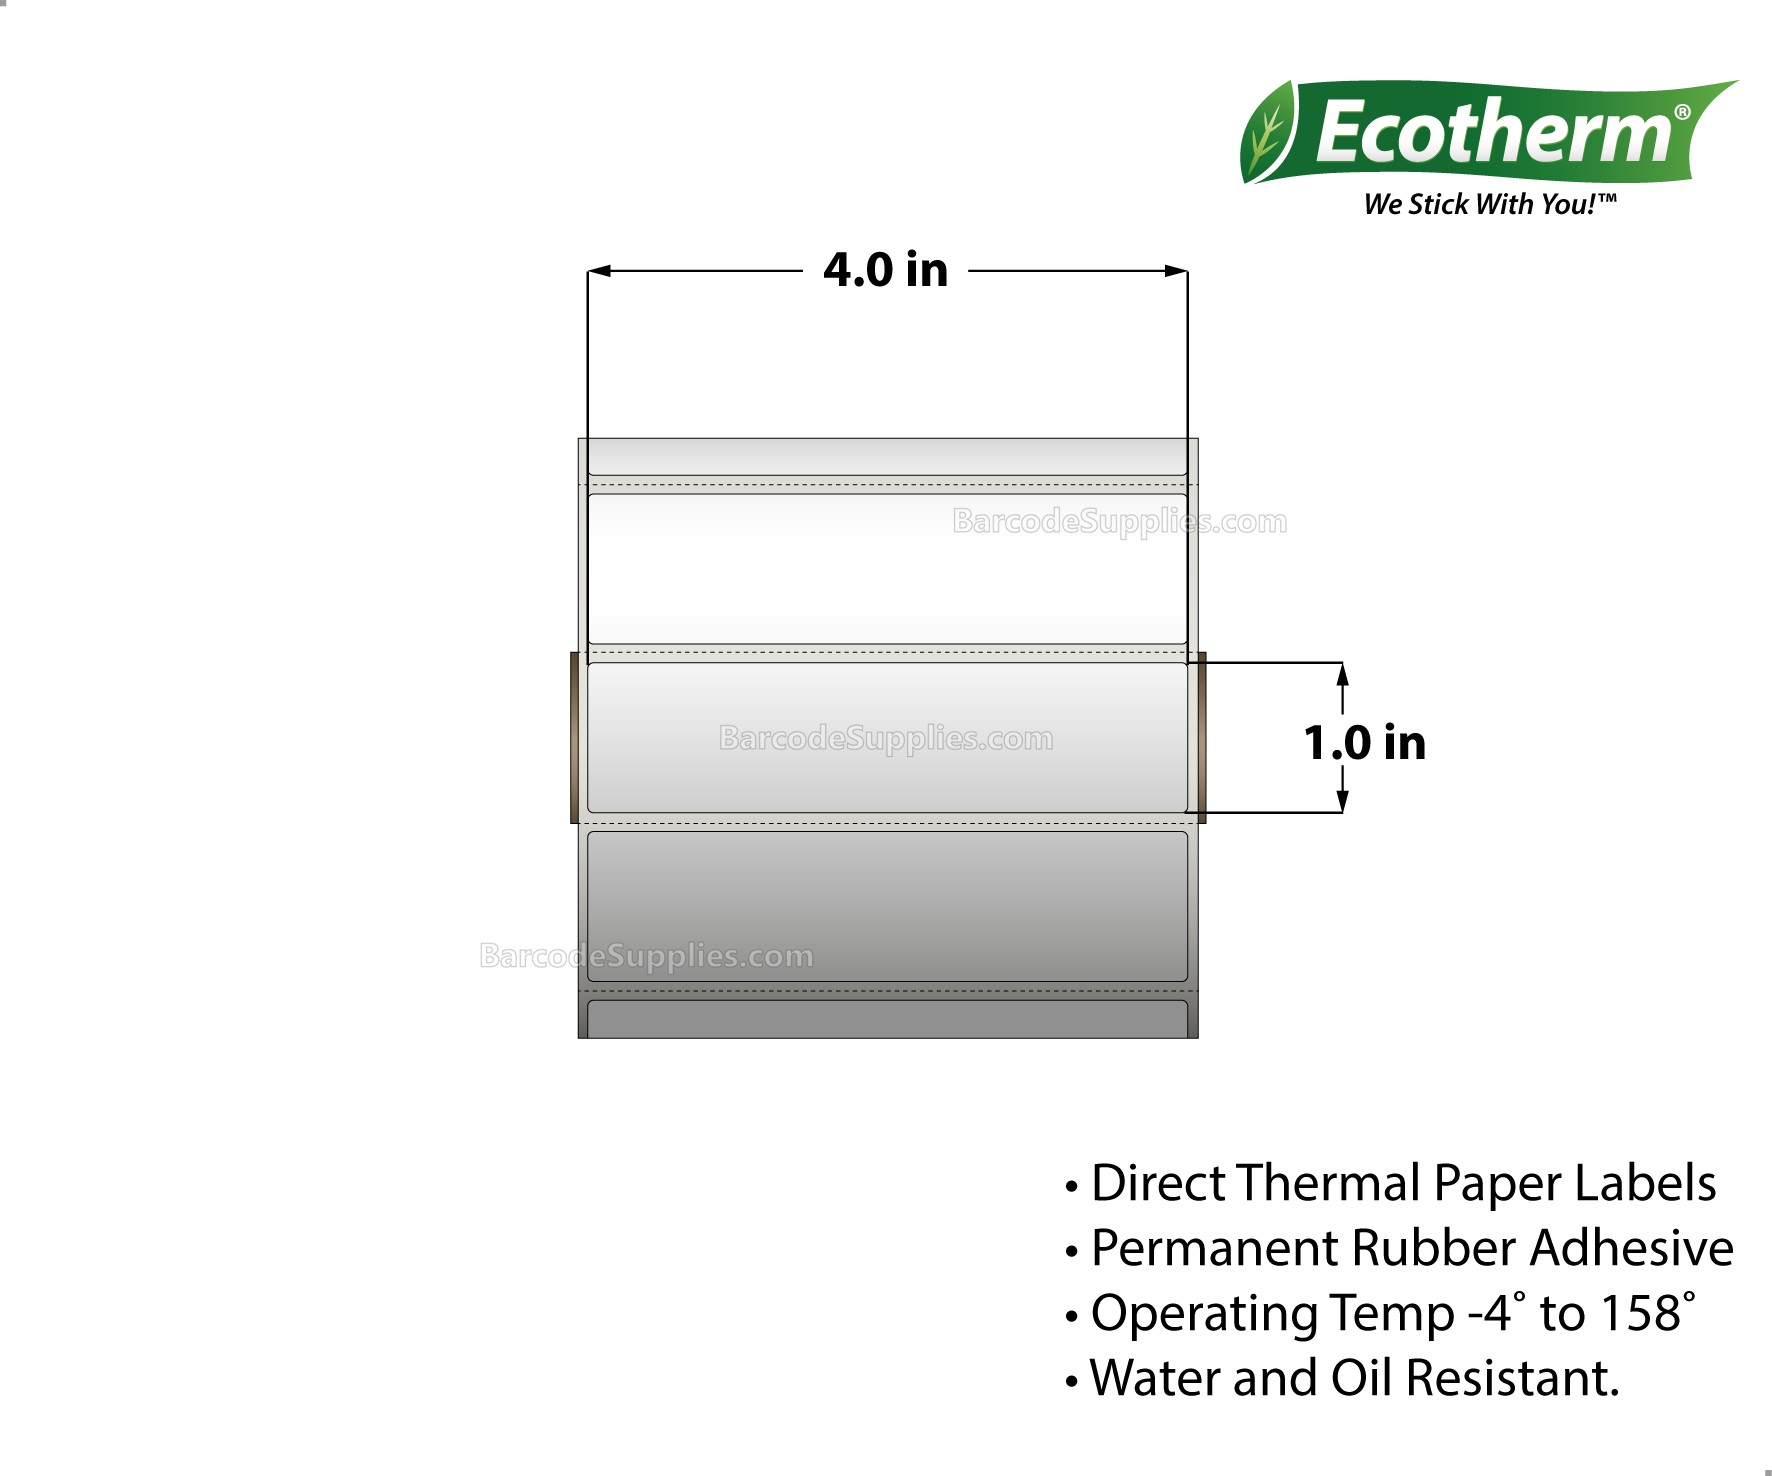 4 x 1 Direct Thermal White Labels With Rubber Adhesive - Perforated - 1340 Labels Per Roll - Carton Of 4 Rolls - 5360 Labels Total - MPN: ECOTHERM14125-4